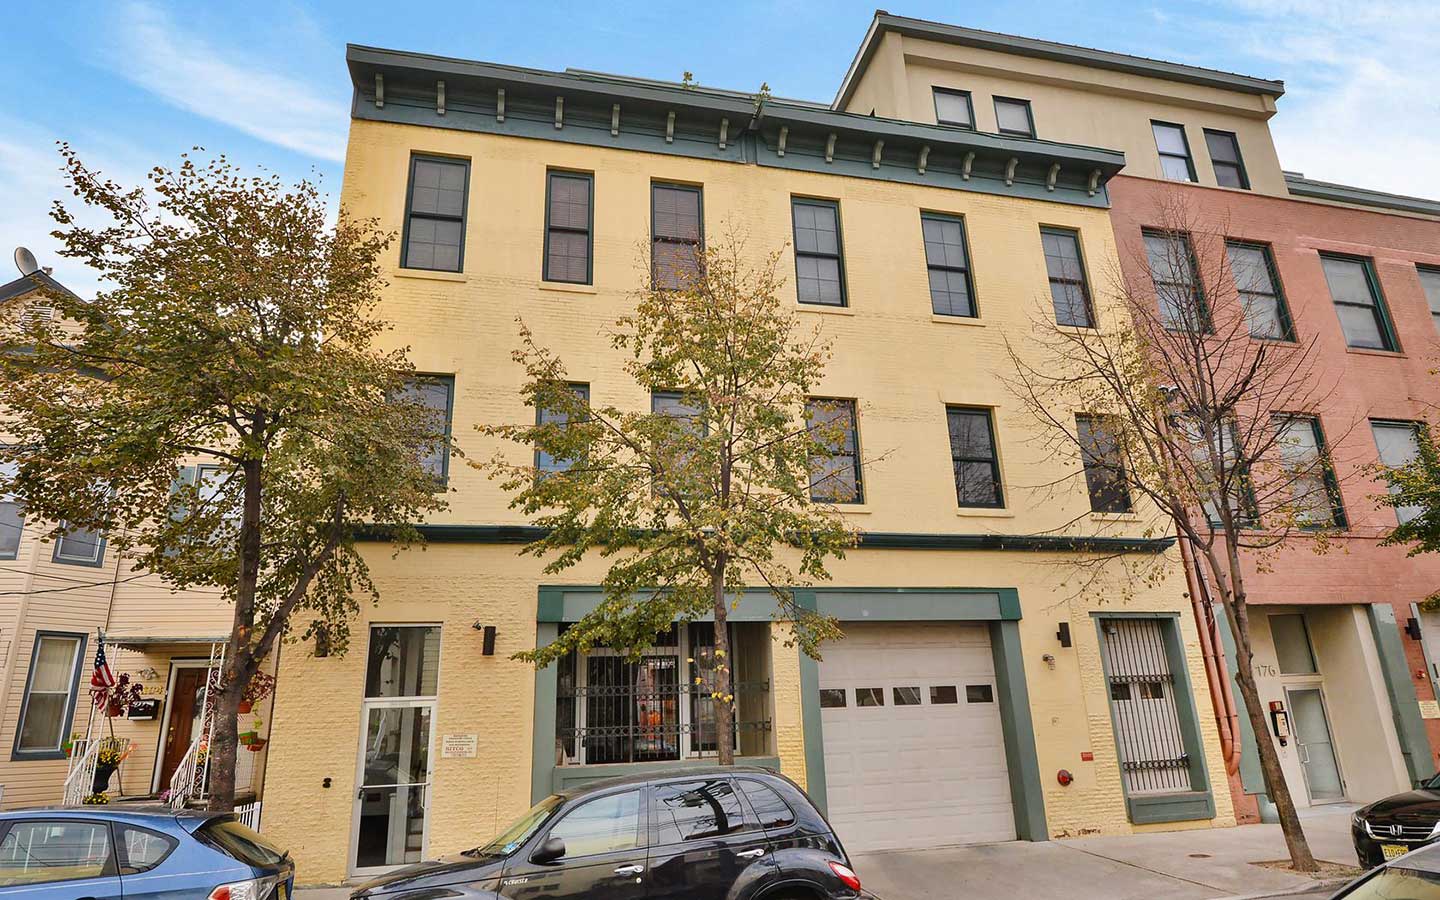 jersey city heights real estate for sale 176 sherman ave bakery lofts